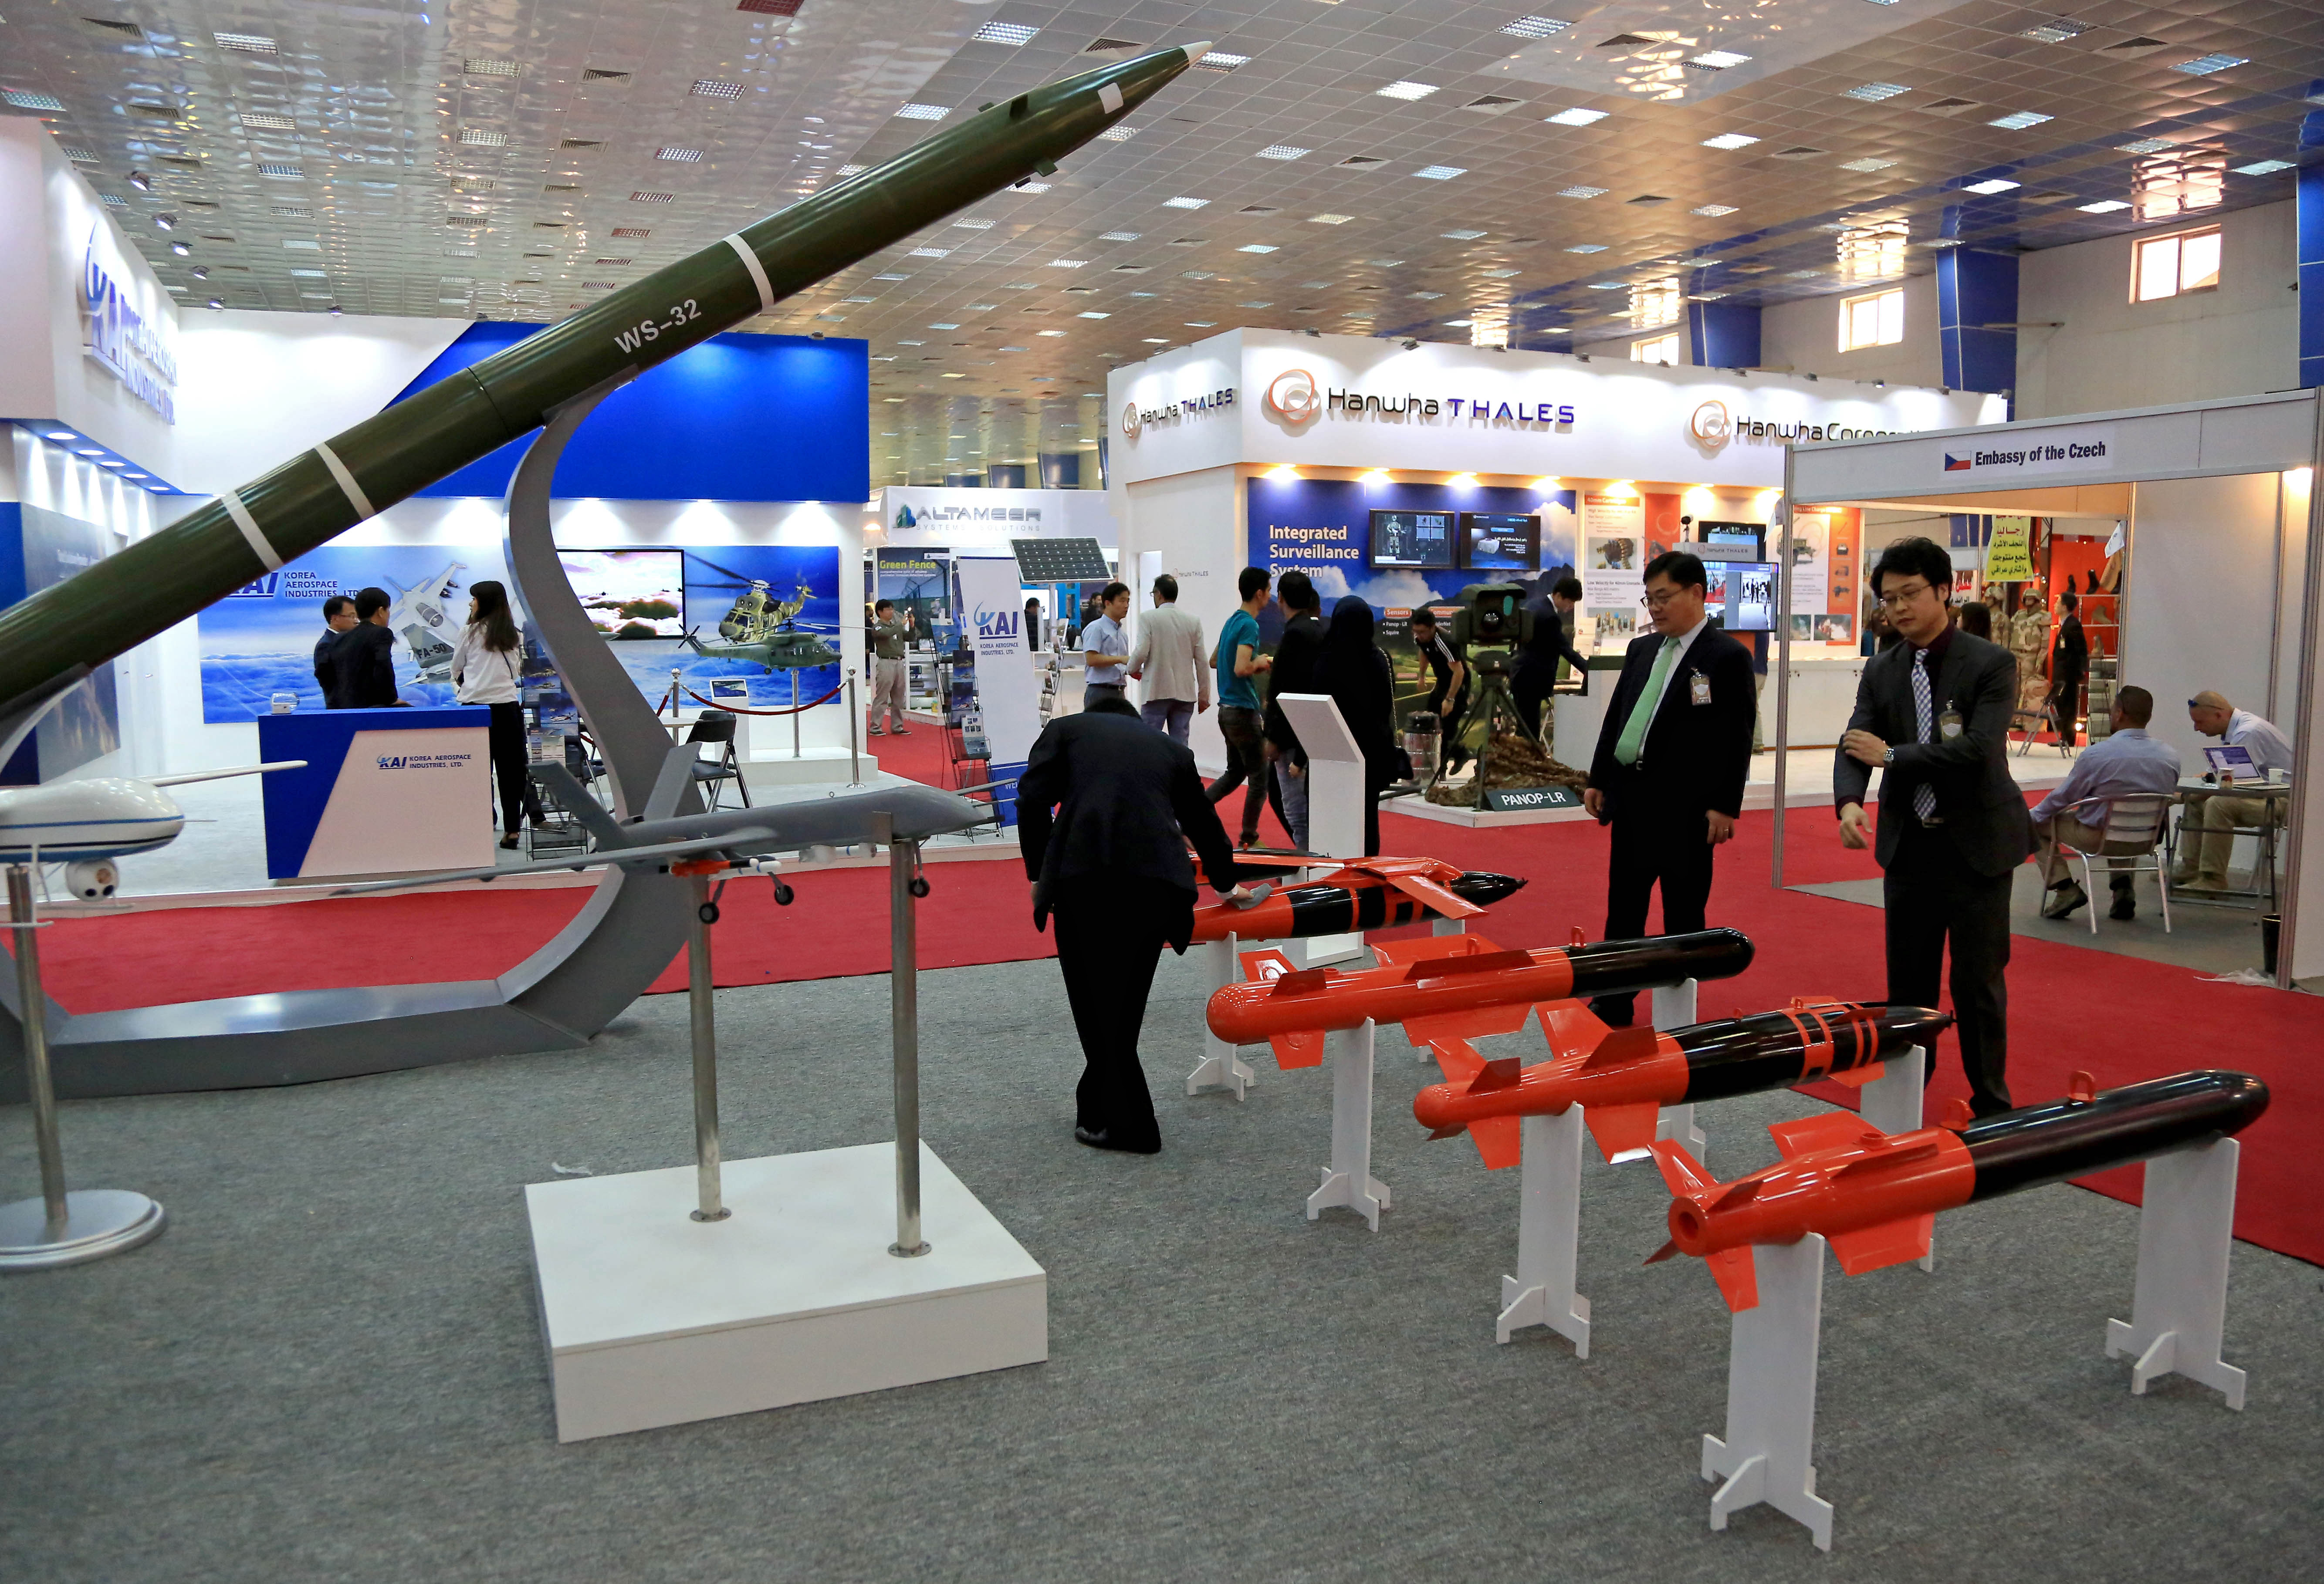 Visitors attend the fourth annual weapons exhibition organized by the Iraqi defense ministry, at the Baghdad International Fairgrounds, Saturday, March, 5, 2016. International companies from Japan, Iran, Germany, Egypt, China and others displayed weapons, armored vehicles, as well as sample models of aircraft, vehicles and boats. (AP Photo/Karim Kadim)